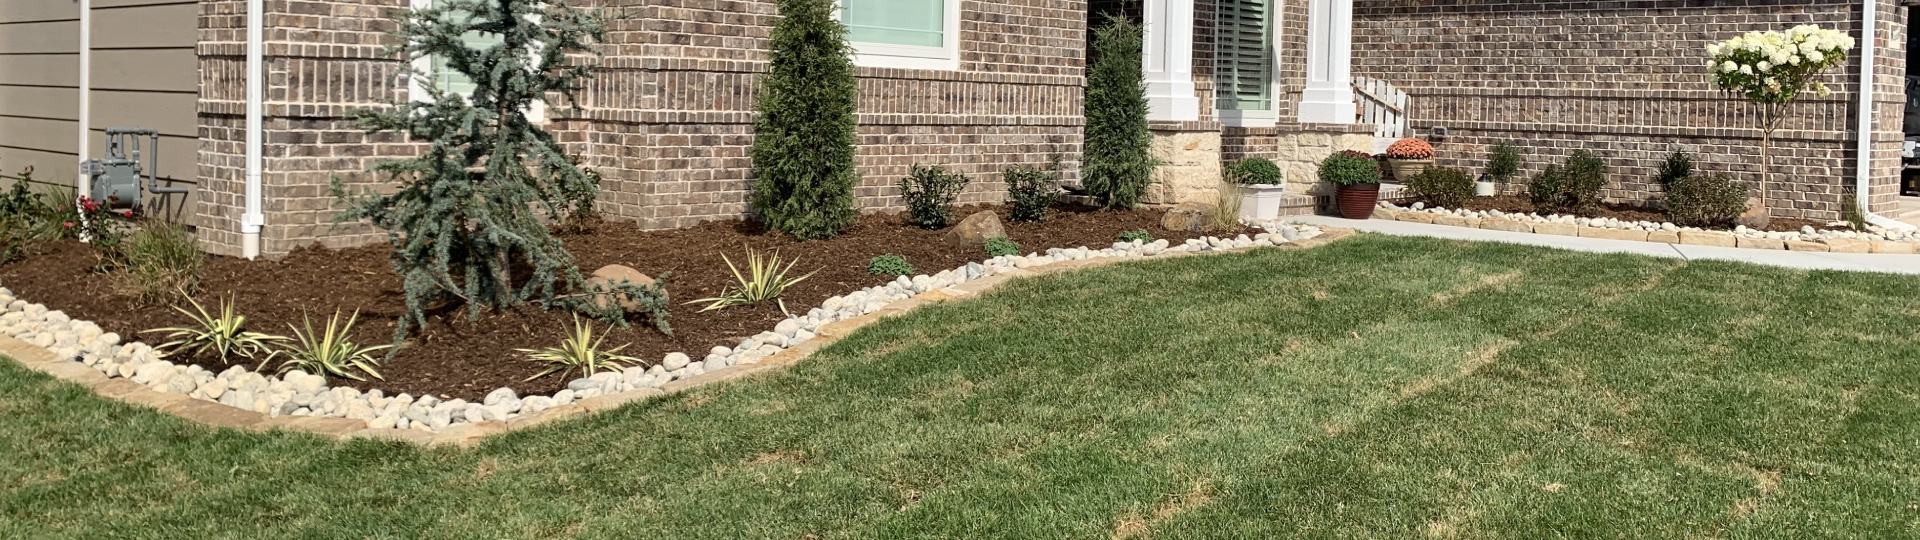 Landscaping Services - Hardscapes - Patios & Pavers